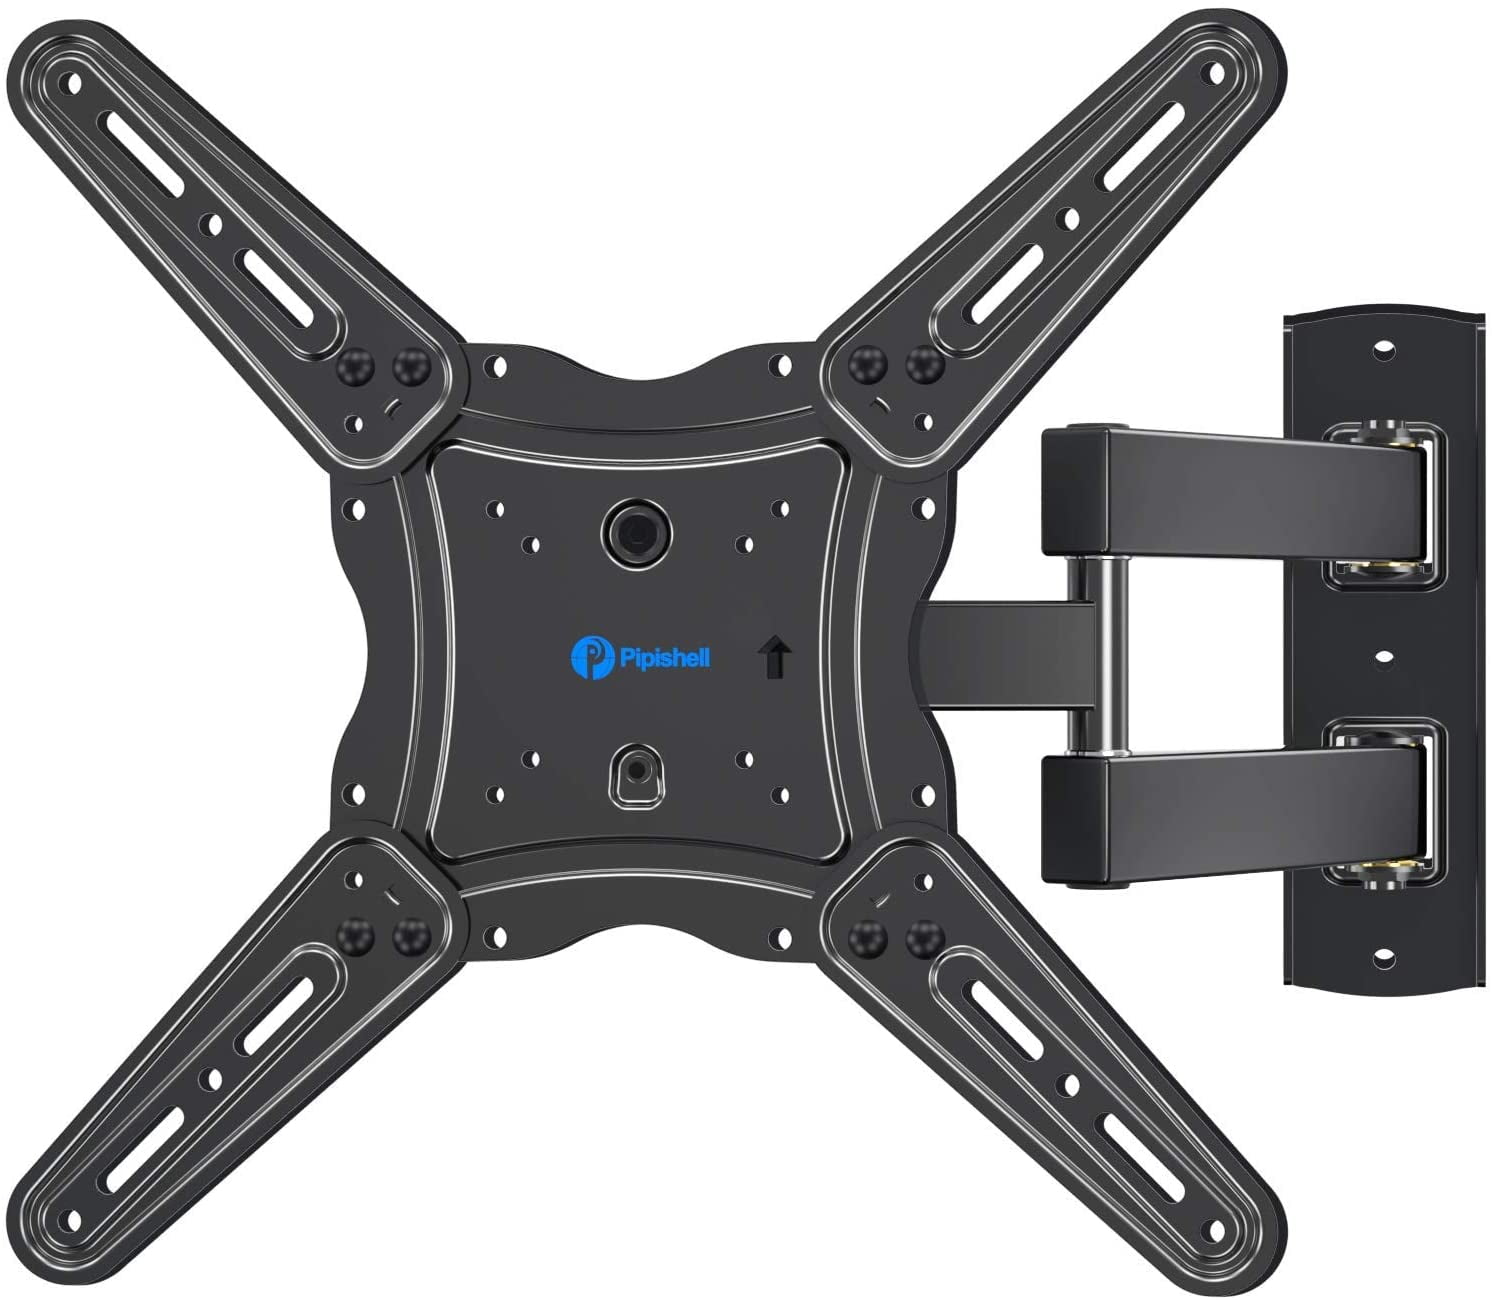 Full Motion TV Mount Bracket with Articulating Swivel Extension Tilting Leveling Max VESA 400x400mm Holds up to 99lbs for LED LCD OLED 4K Flat Curved Screen Pipishell TV Wall Mount for 26-55 inch TVs 